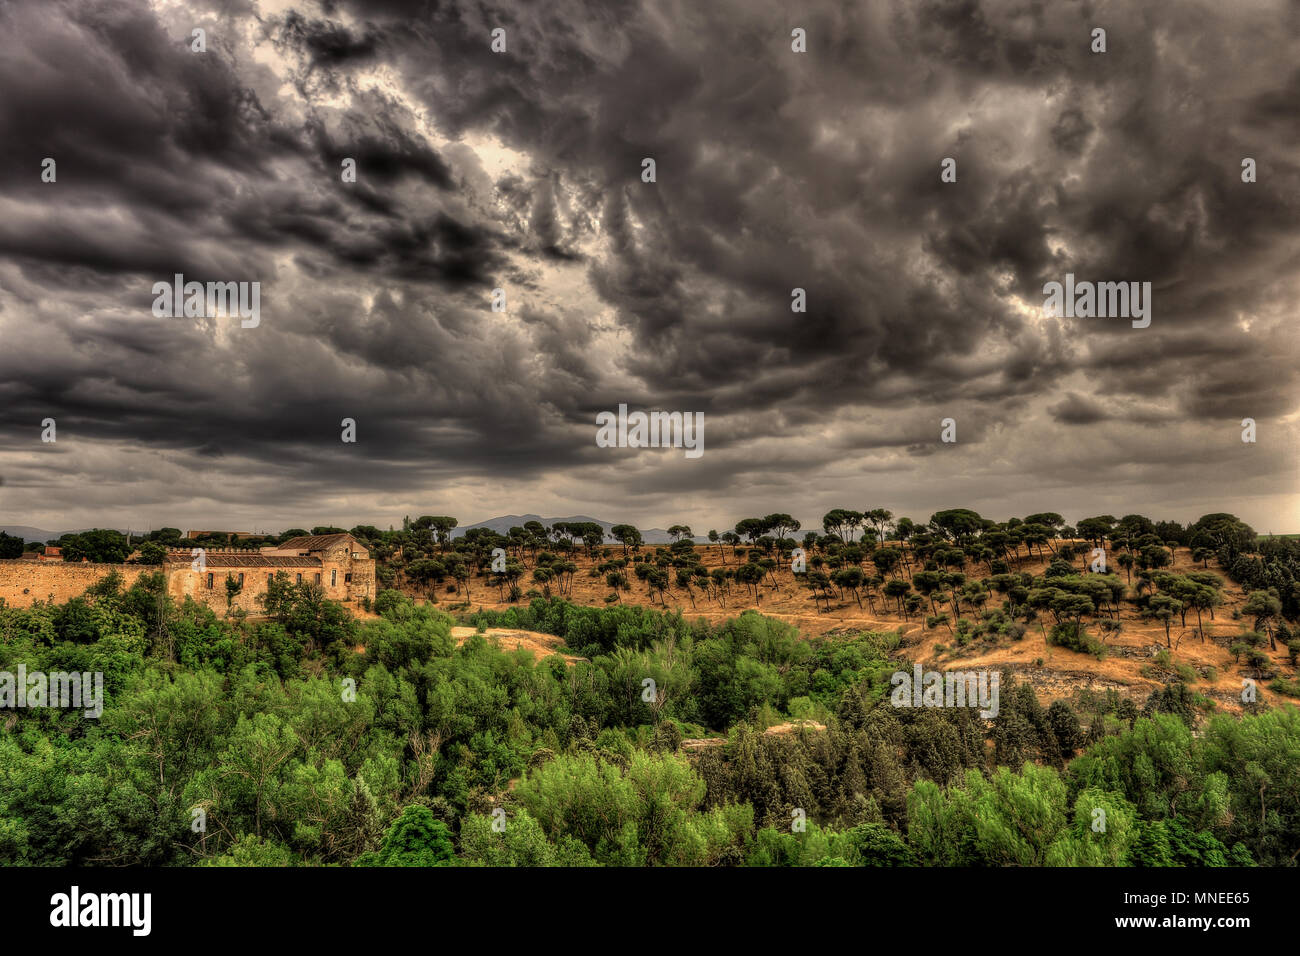 Spectacular view on the hill and greenery with dark, dramatic, stormy clouds in Segovia, Spain. Stock Photo